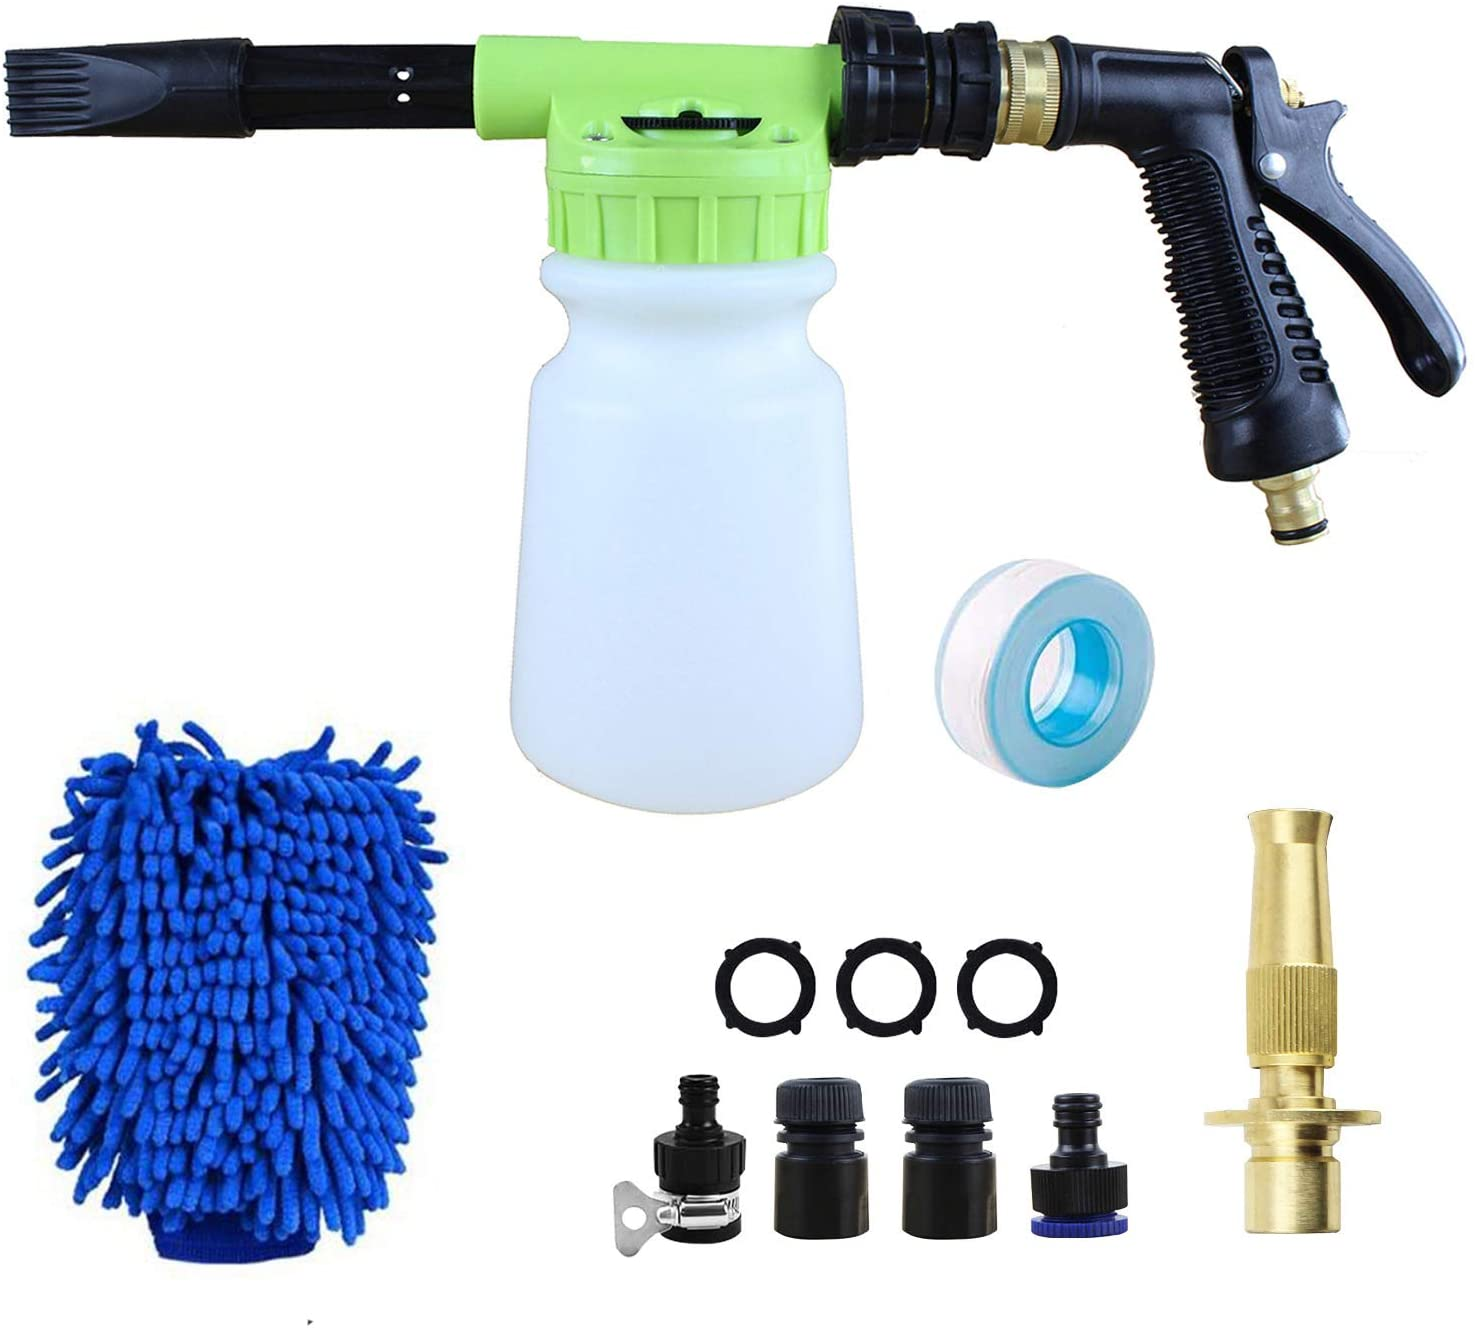 Car Foam Gun Pressure Washer Blaster Hose Wash Sprayer Foam Cannon with Adjustment Ratio Dial for Car Home Cleaning Garden with 0.26 Gallon Bottle